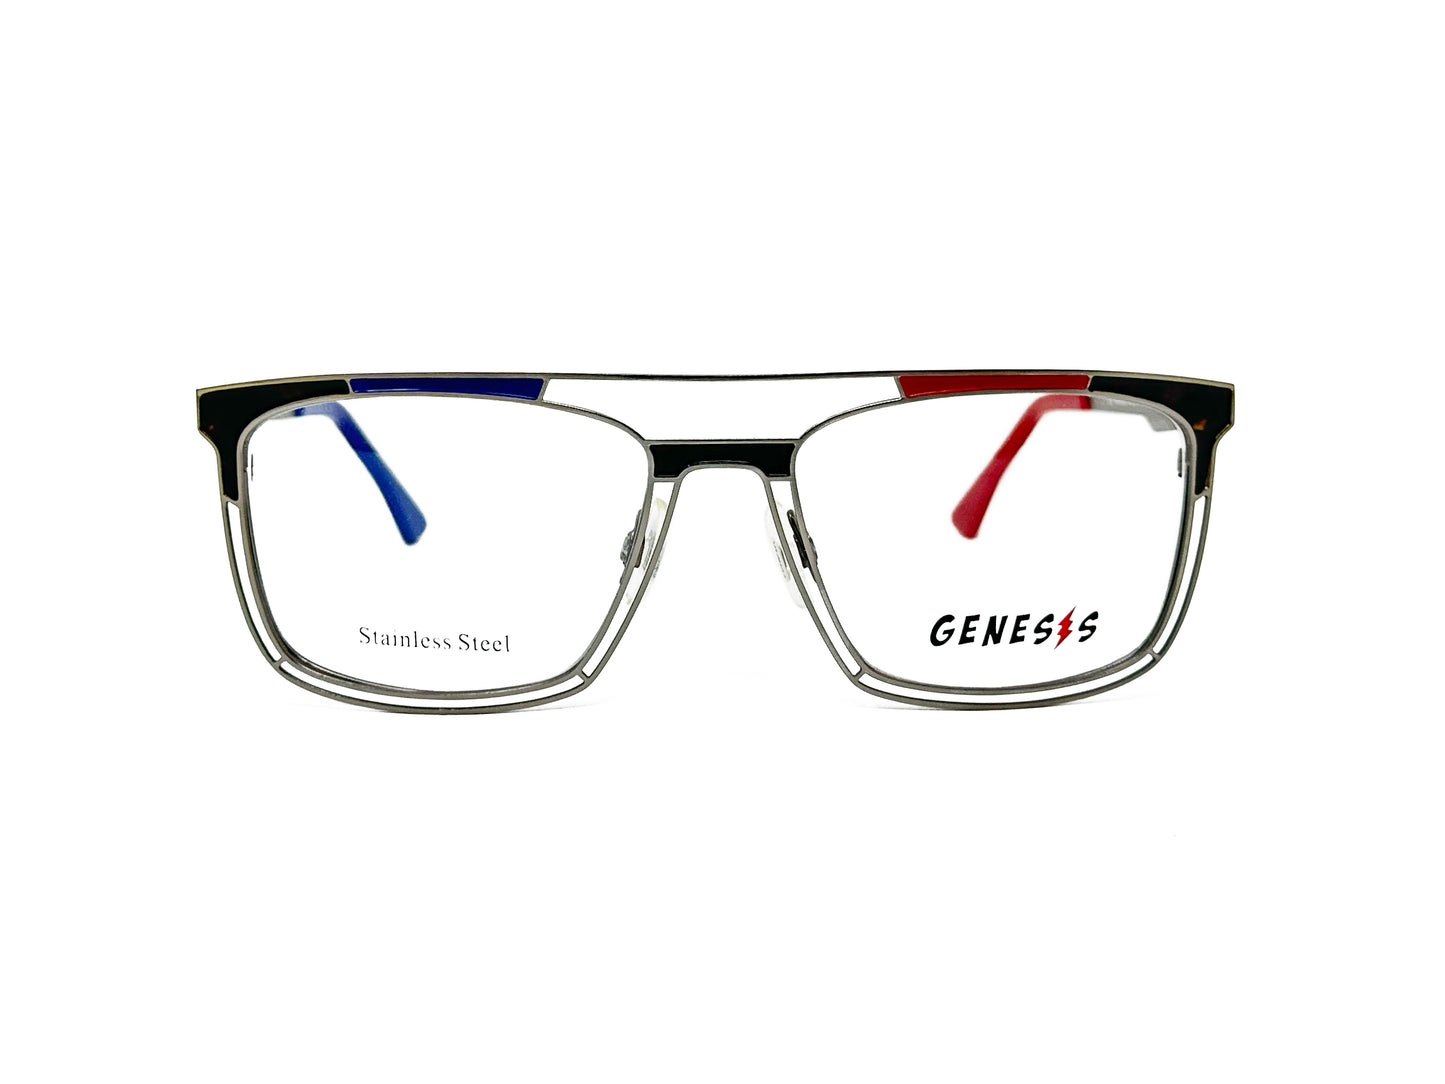 Genesis rectangular, metal optical frame with bar across top and colored accents. Model: GV1530. Color: 2 - Silver metal with black, red, and blue accents. Front view. 